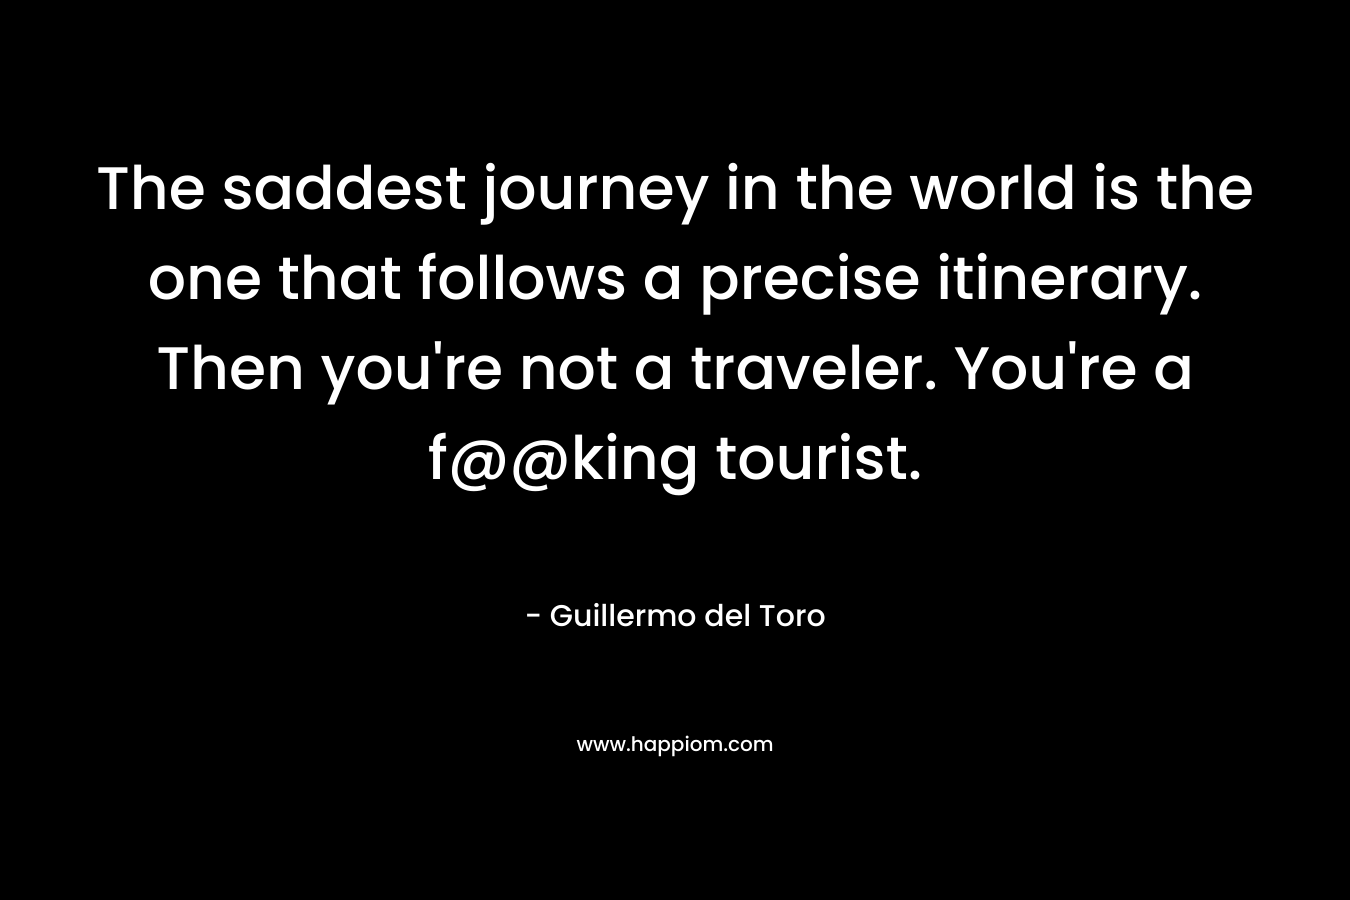 The saddest journey in the world is the one that follows a precise itinerary. Then you’re not a traveler. You’re a f@@king tourist. – Guillermo del Toro